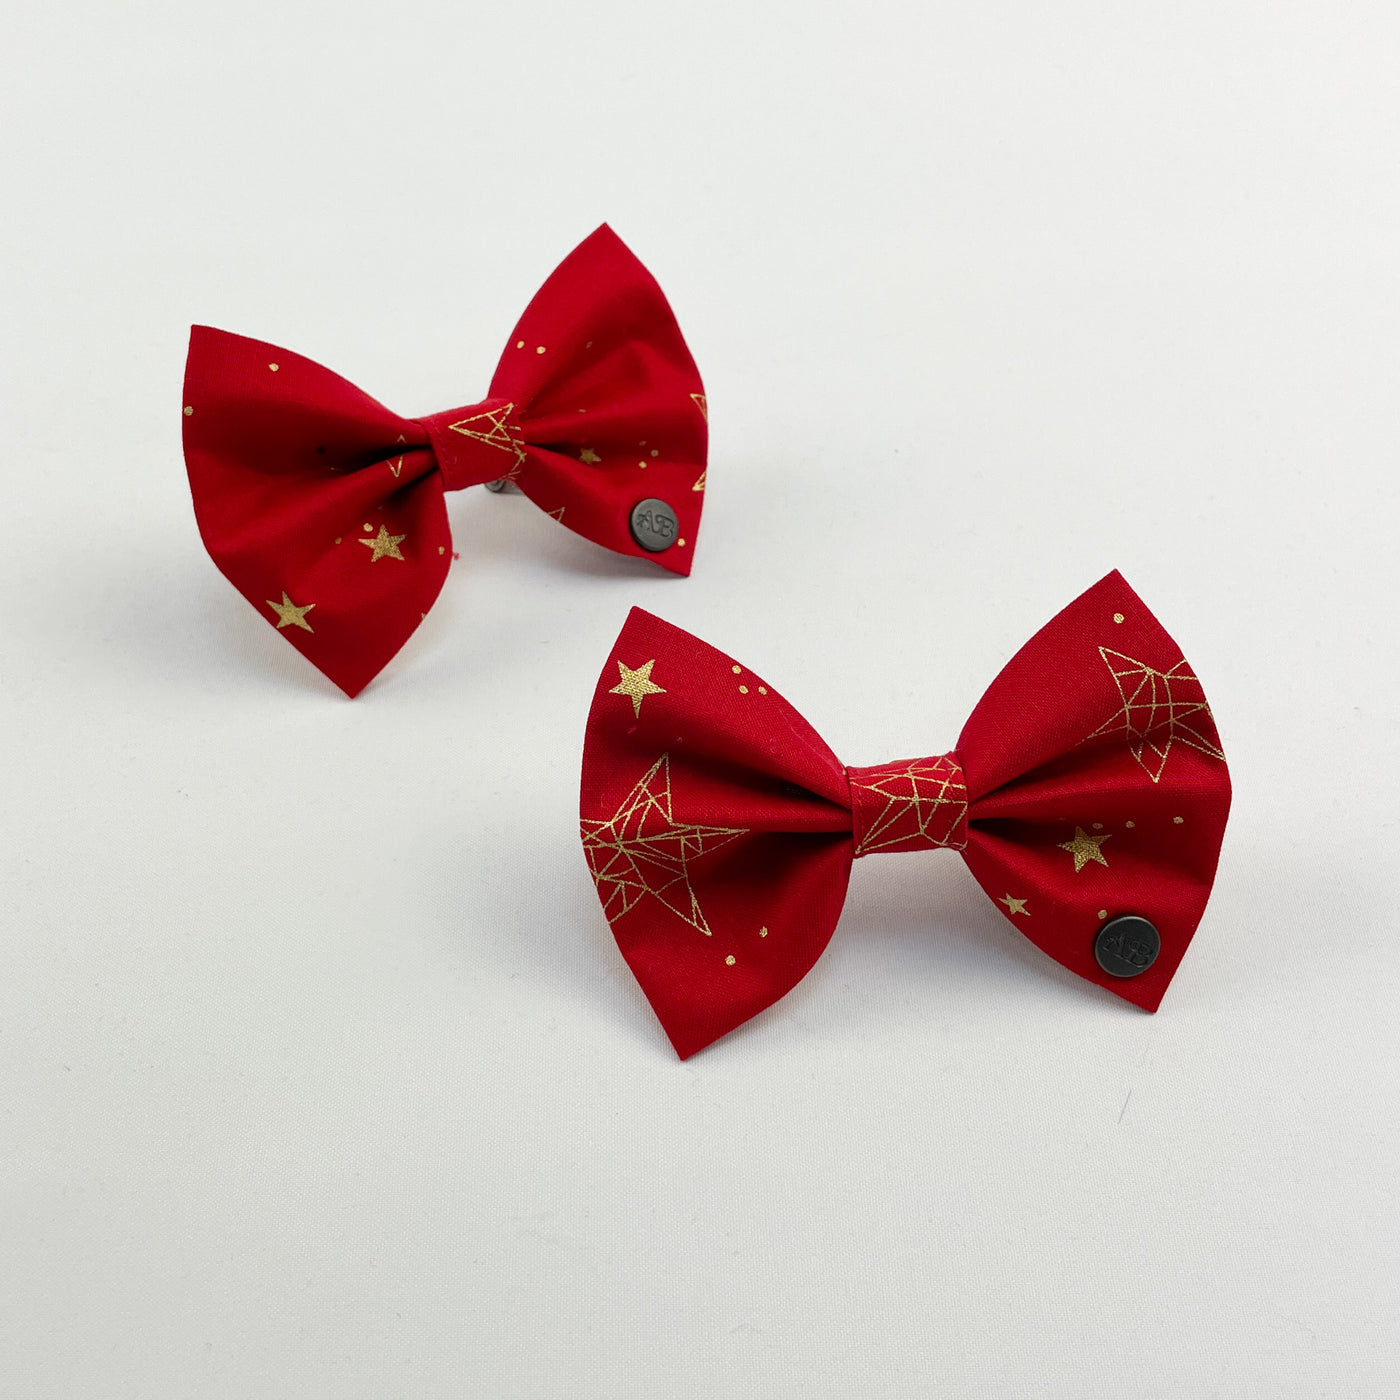 Two Red Christmas Star dog bow tie